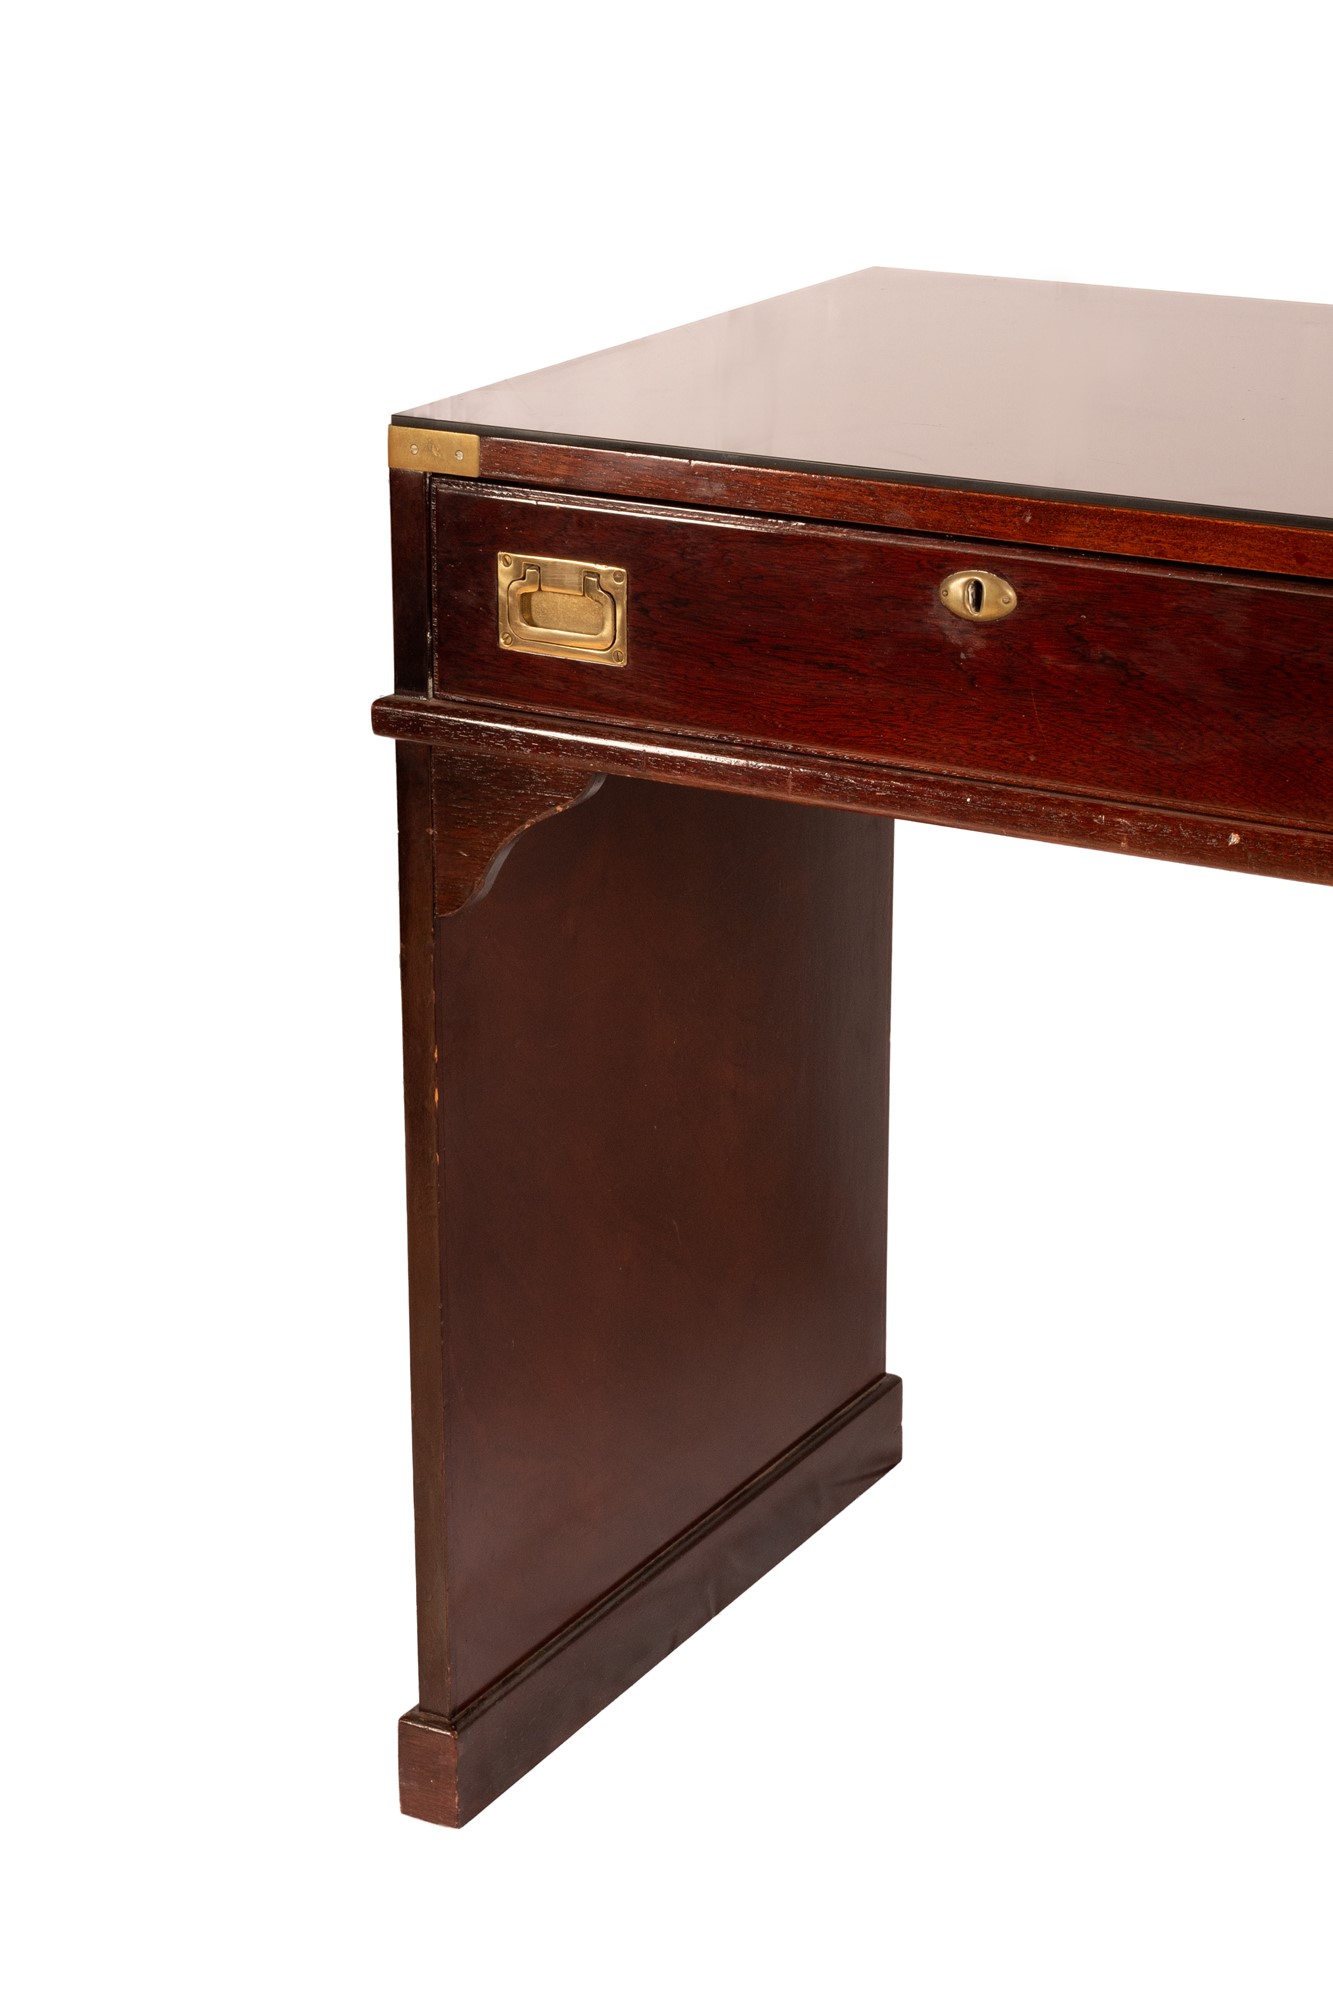 Byron marine style mahogany desk with five drawers on the front and glass top - Image 11 of 19